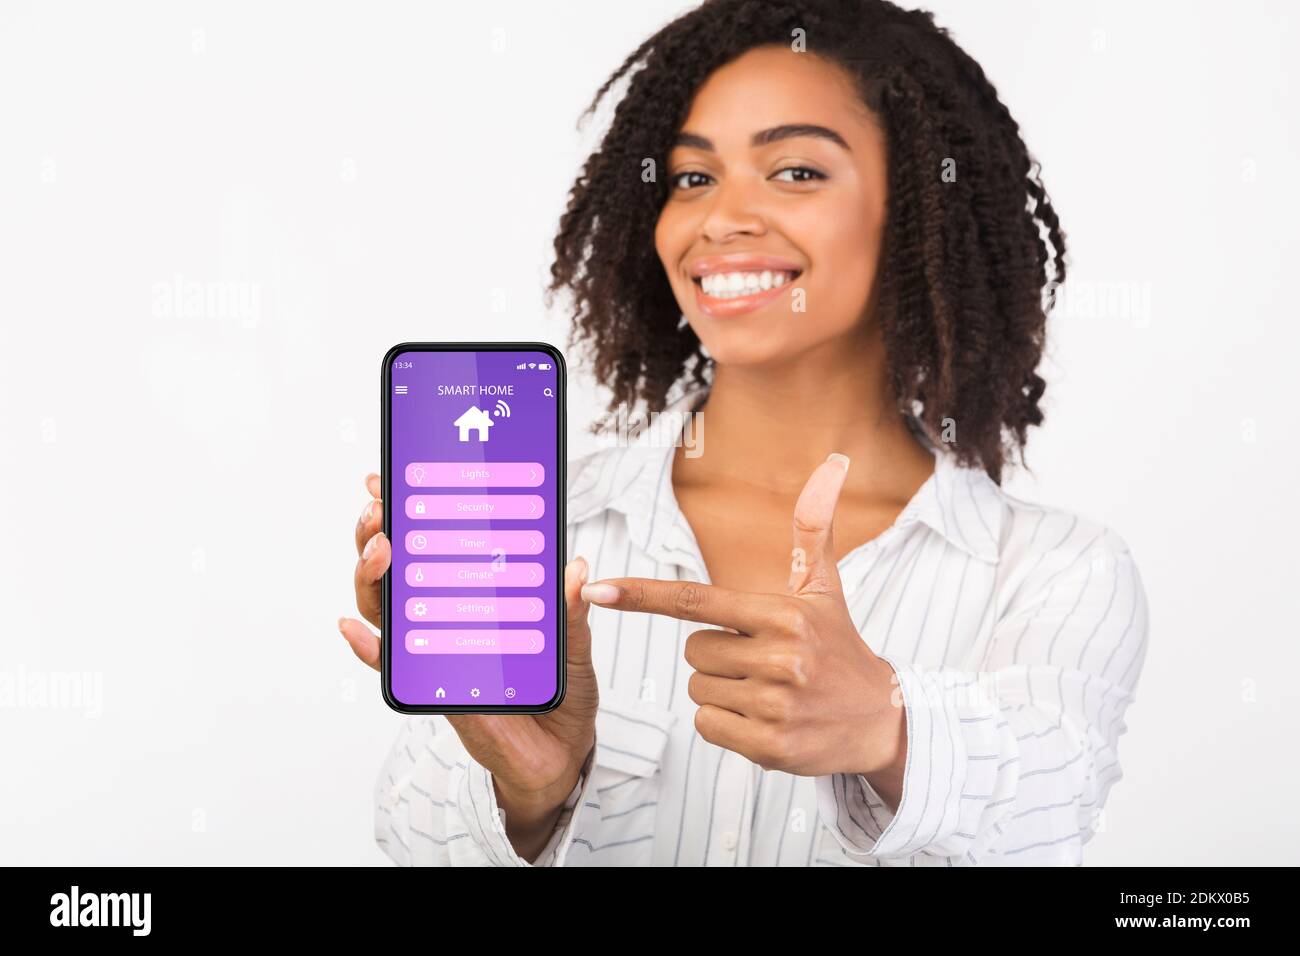 Collage of young black woman controlling appliances and devices, using modern smart home app on cellphone Stock Photo